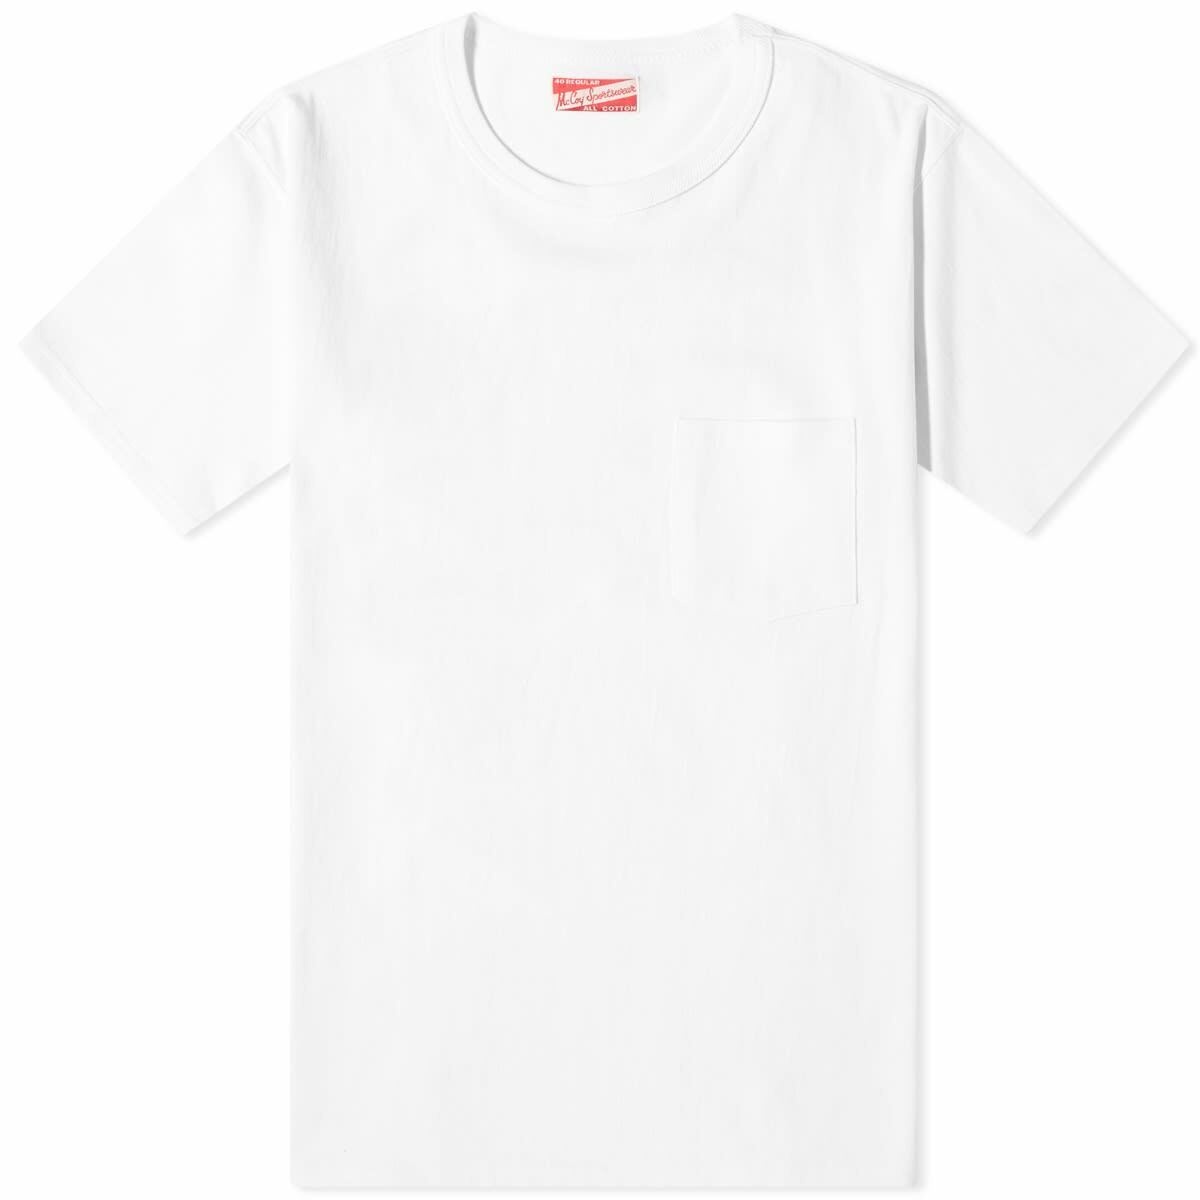 Photo: The Real McCoy's Men's The Real McCoys Joe McCoy Pocket T-Shirt in White